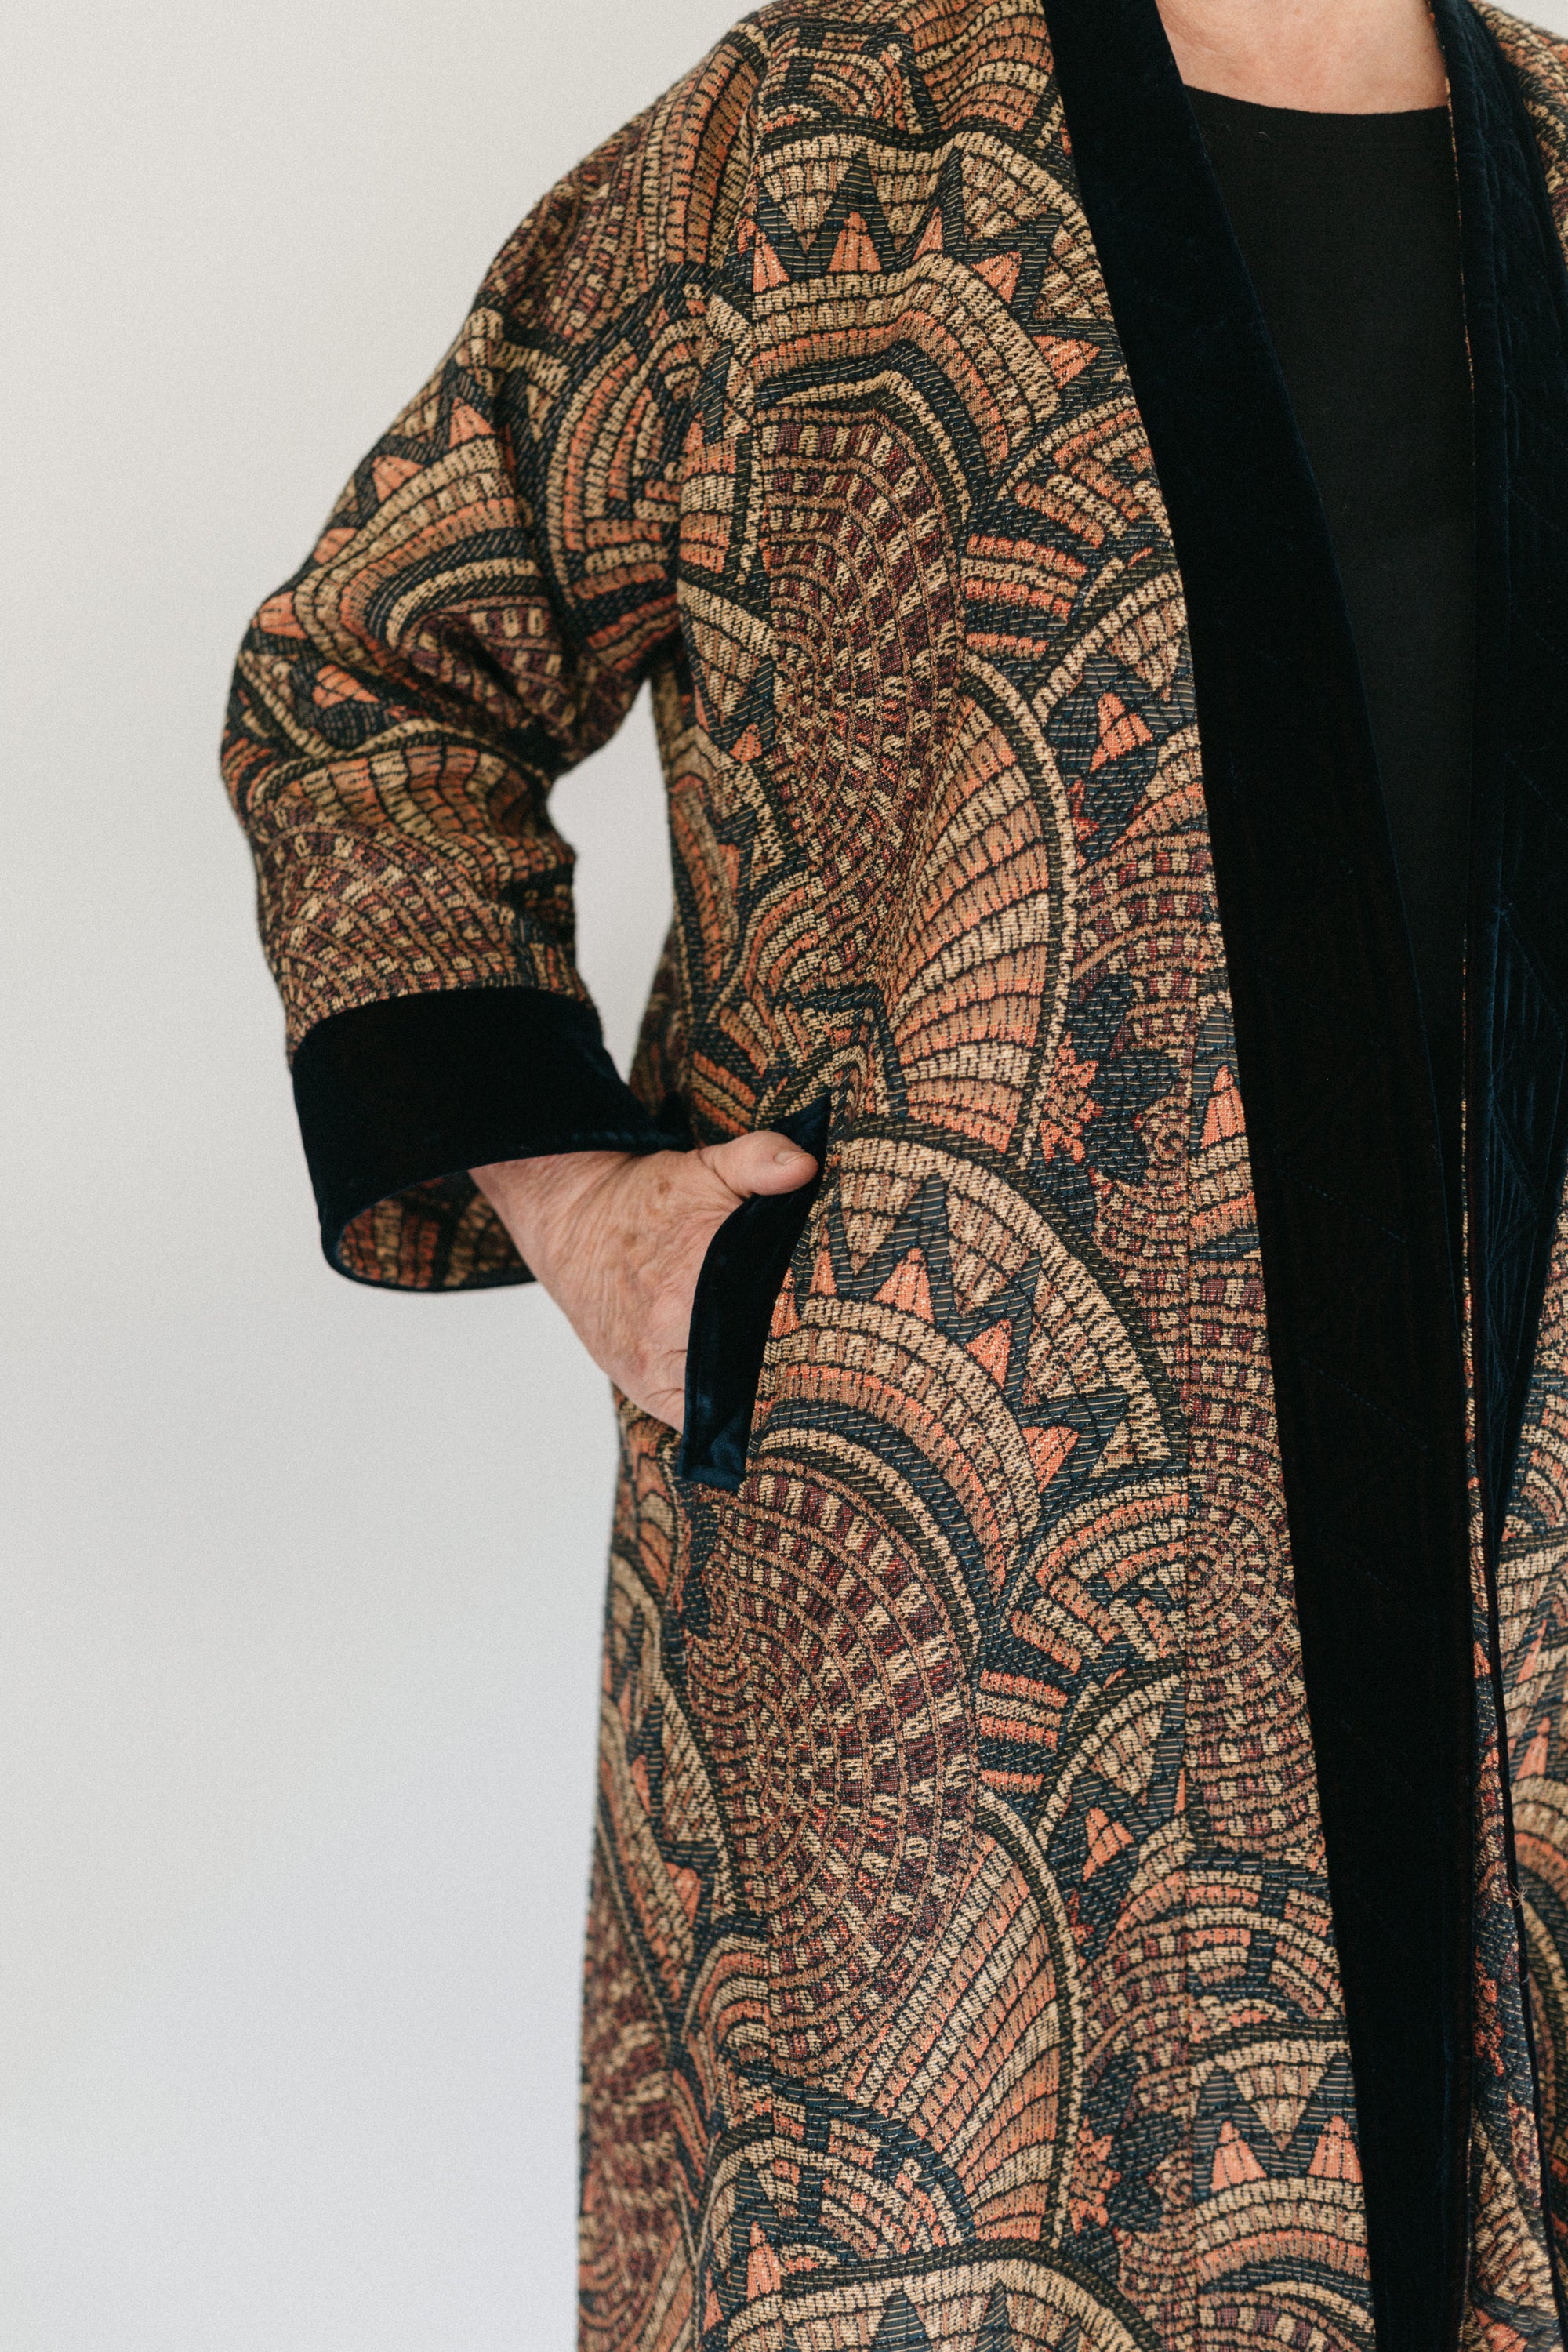 Close up of Turkish coat with view of side pocket.  Model has hand partially in pocket.